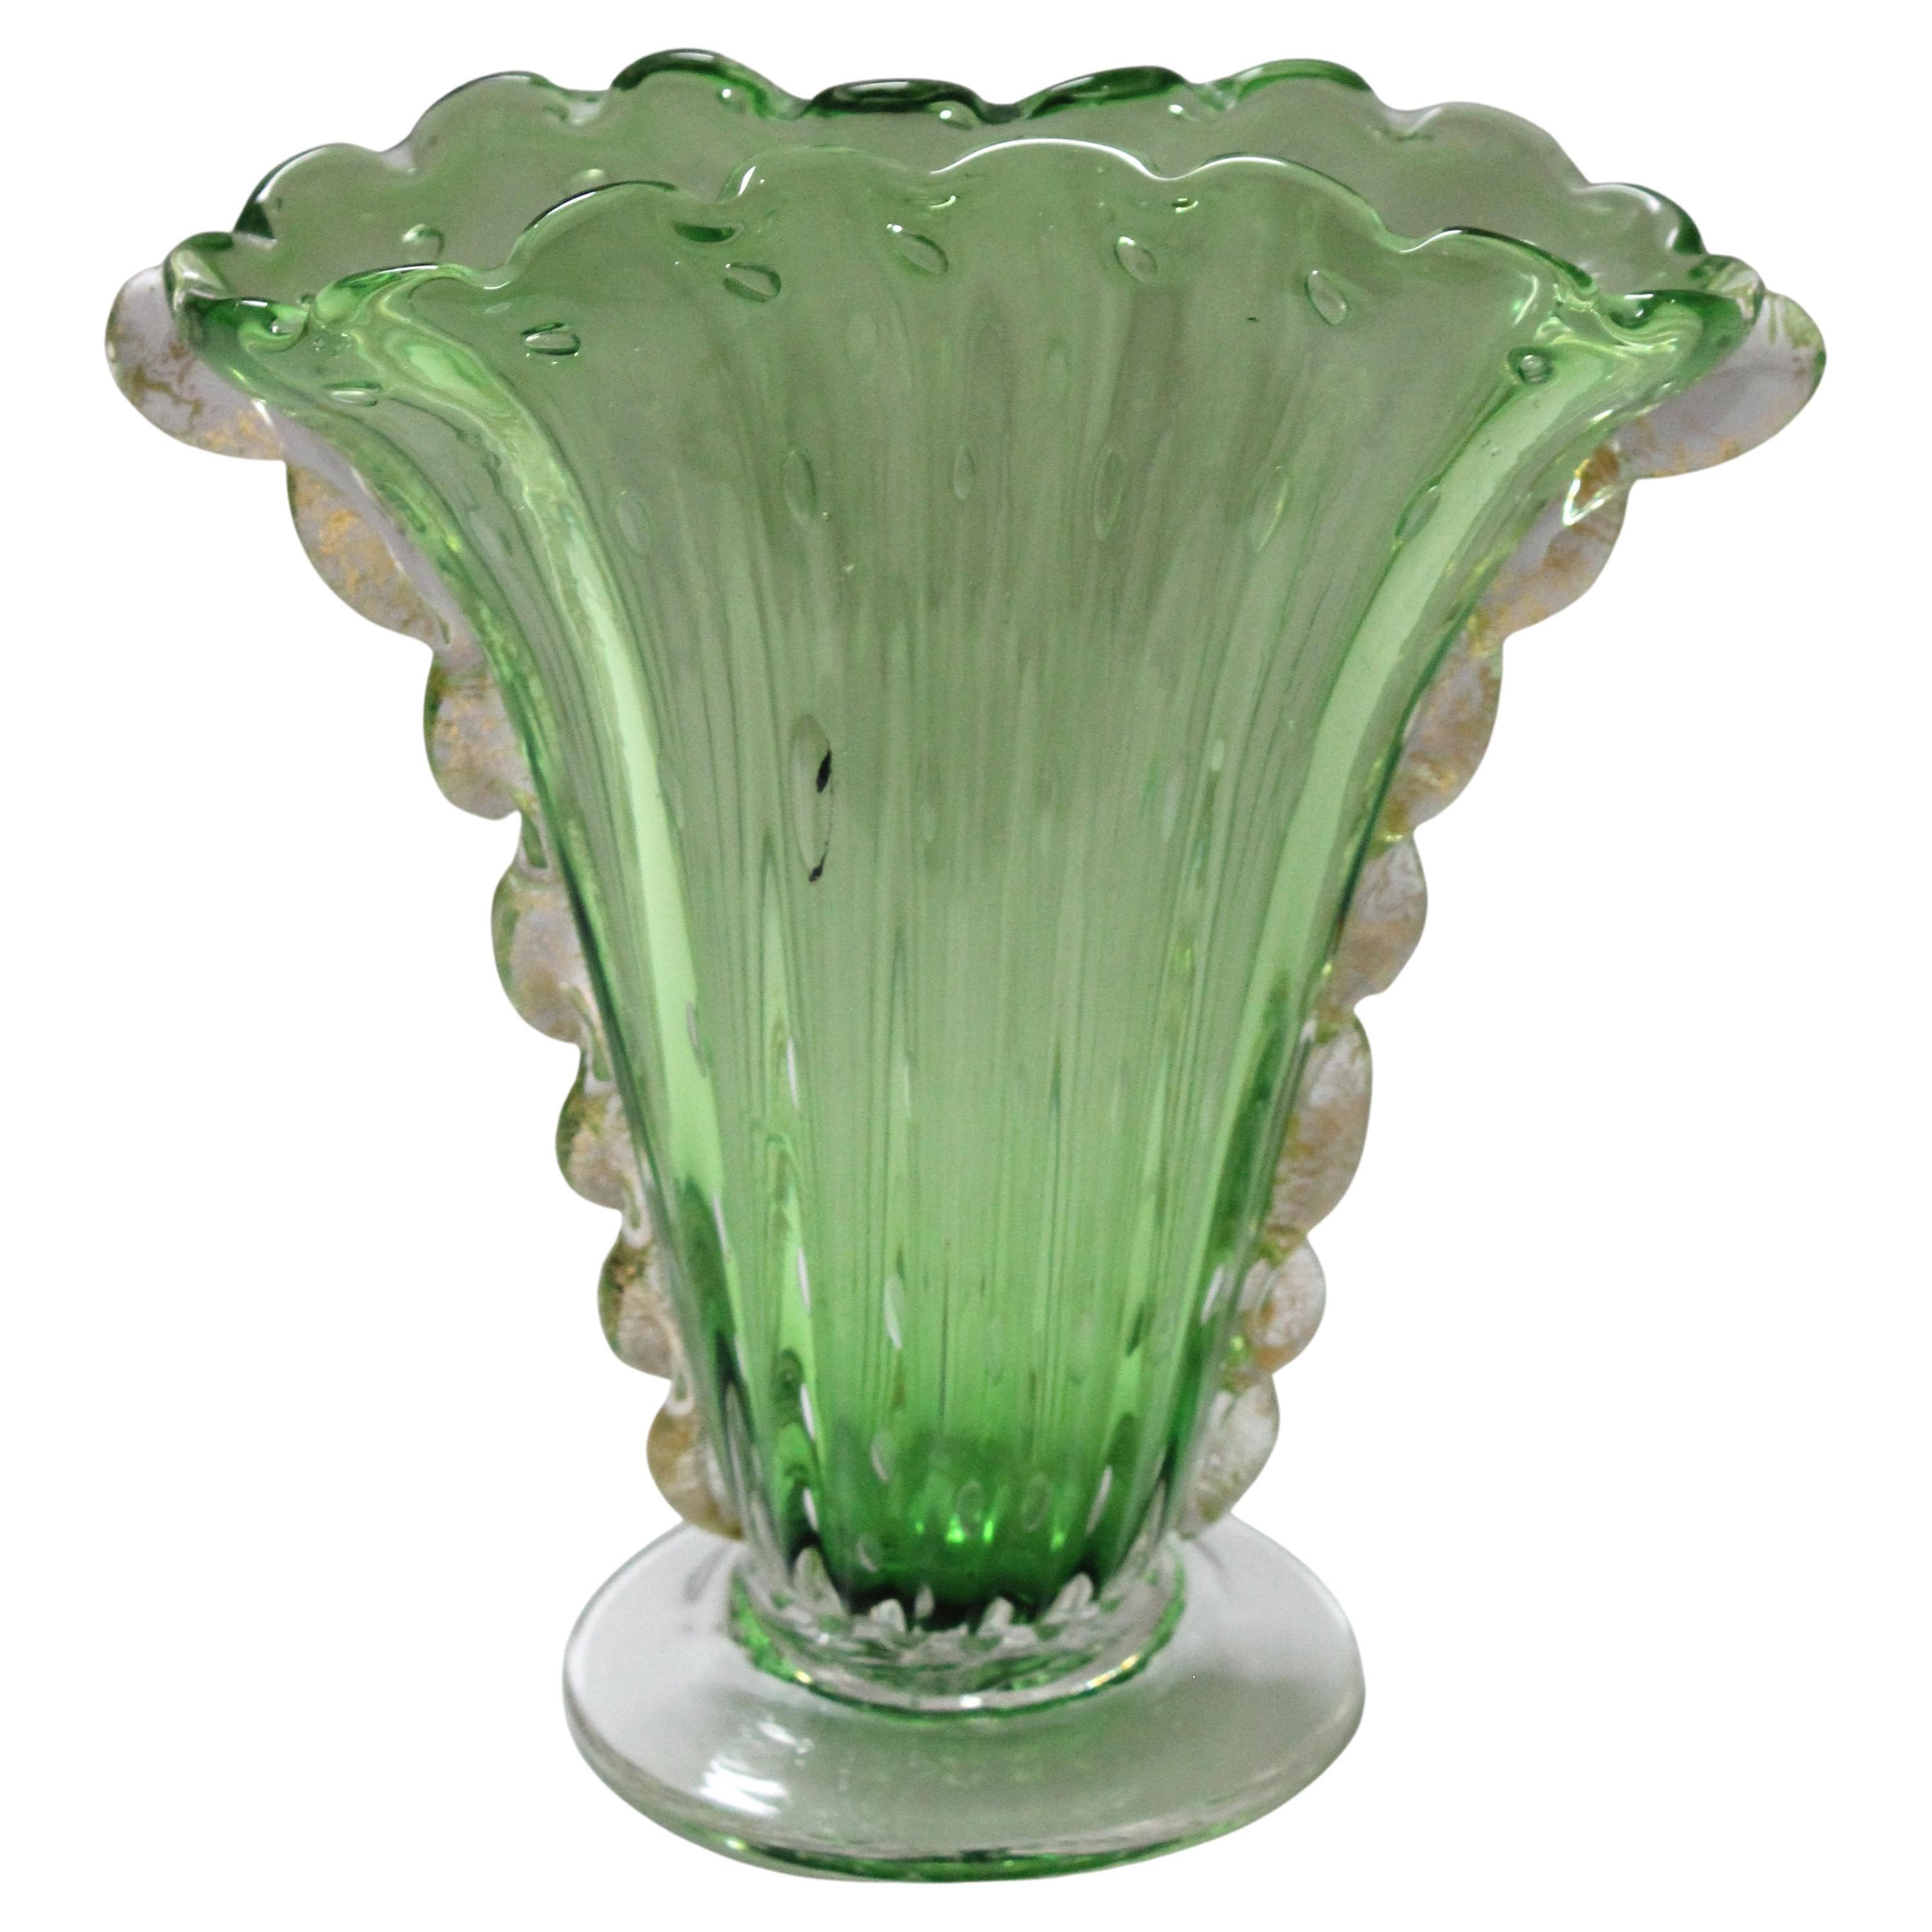 Art Deco 1930s Barovier et Toso Murano glass vase light green with controlled elongated bubbles and gold inclusions. 

The controlled bubbles near the top are close to circular, but are elongated as the glass goes near the base. The pontil shows